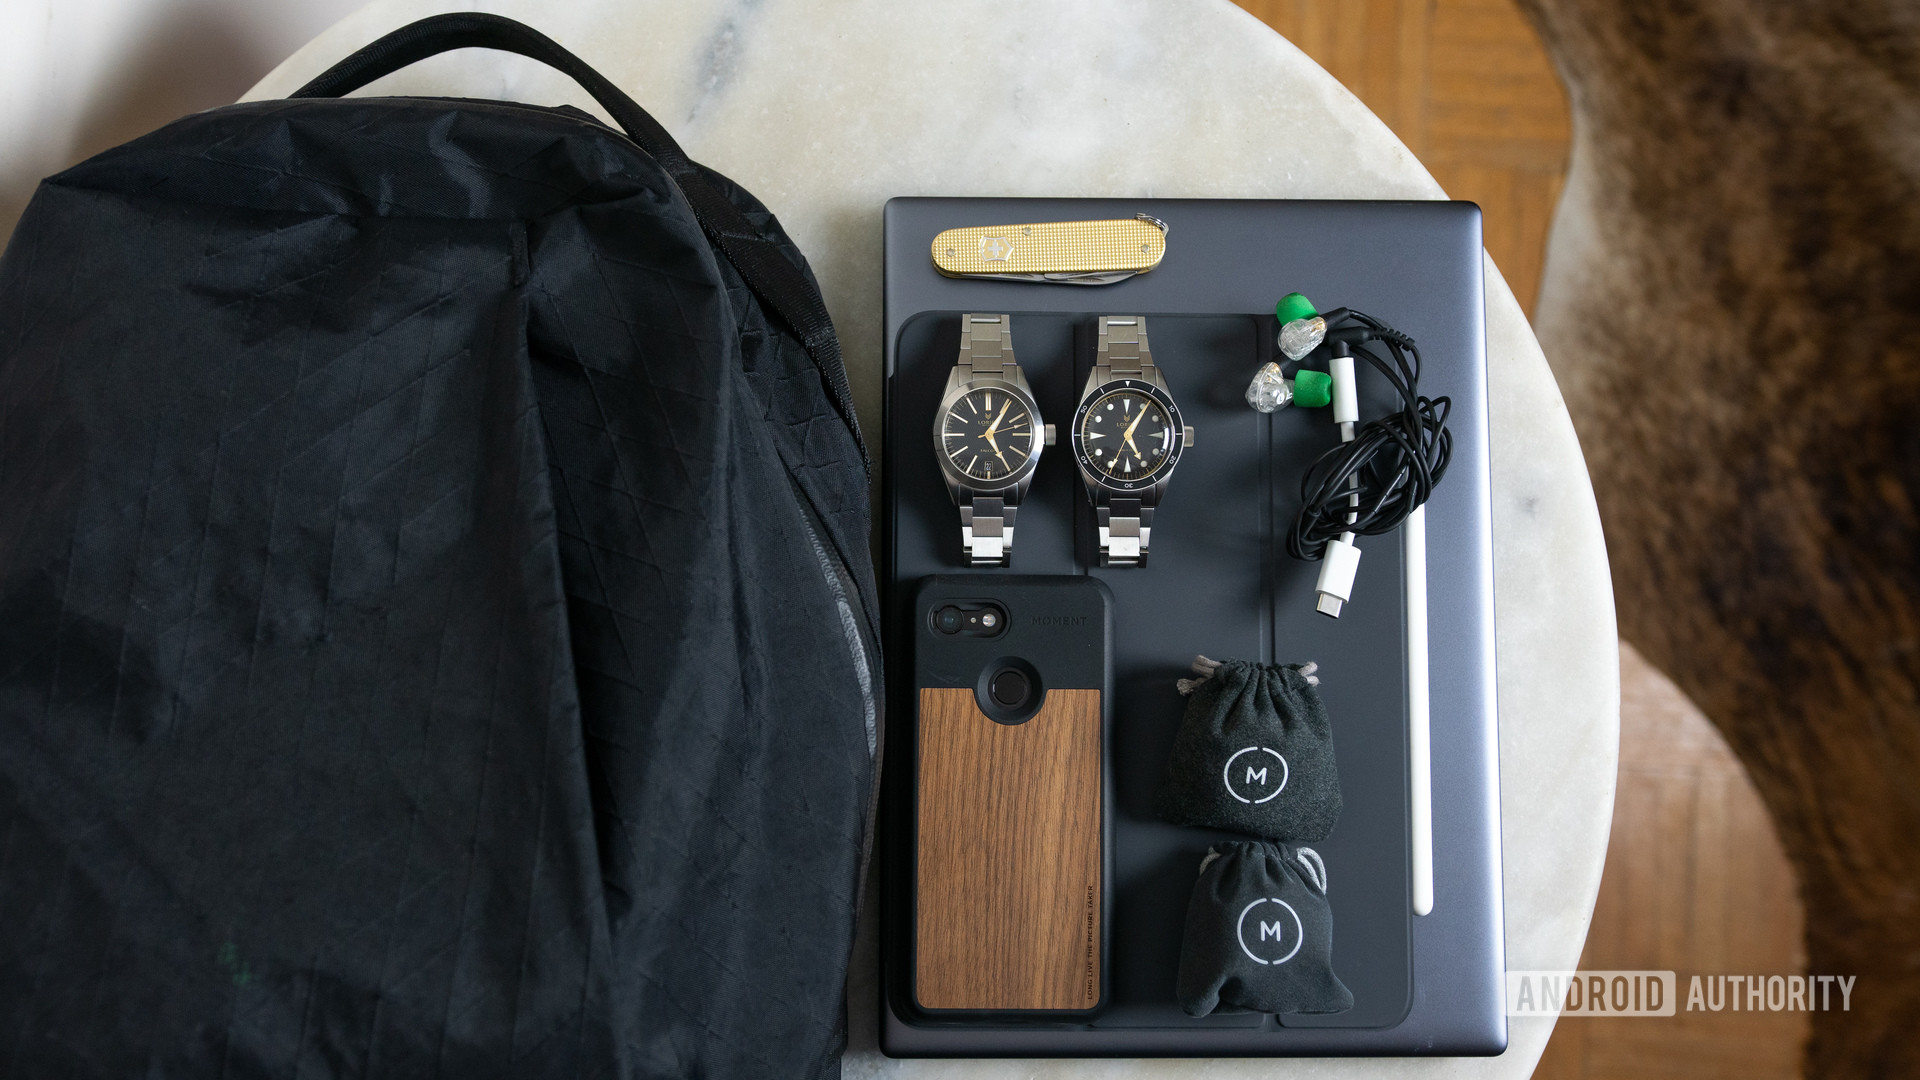 A backpack, Pixel 3 phone, two watches, and other daily essentials that Adam always uses.